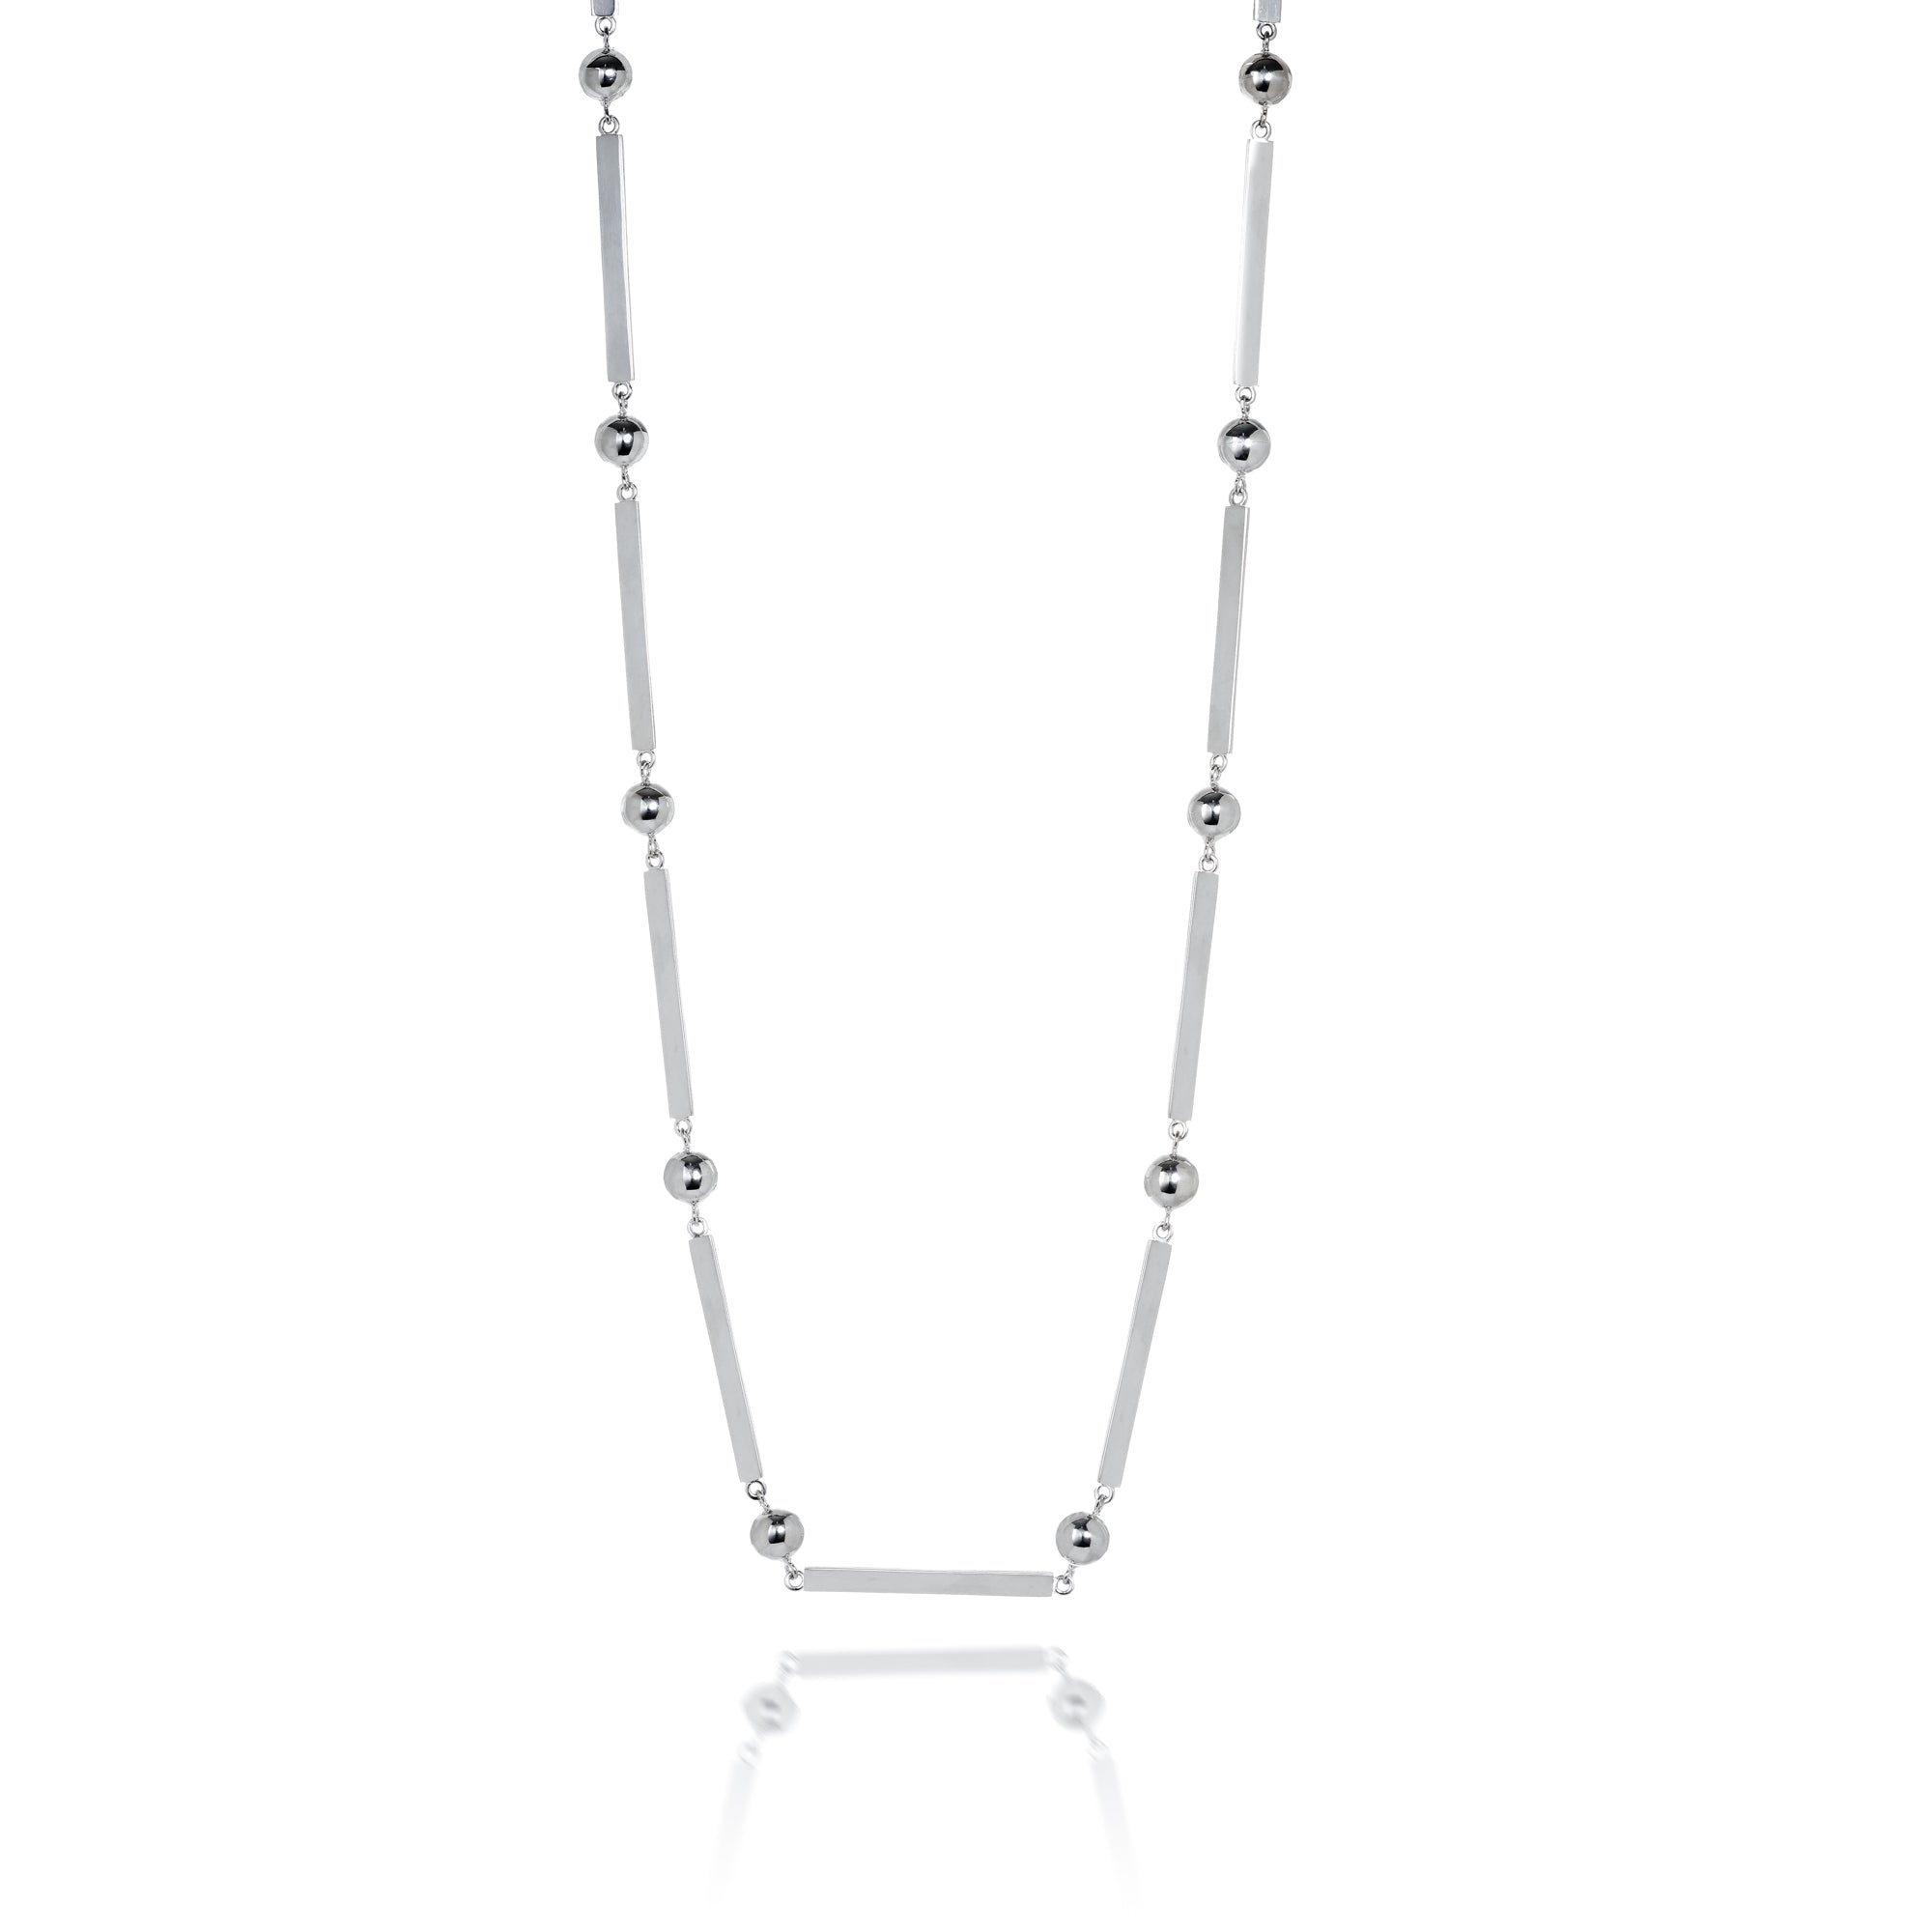 Women’s Silver Ball & Bar Necklace Sophie Anna